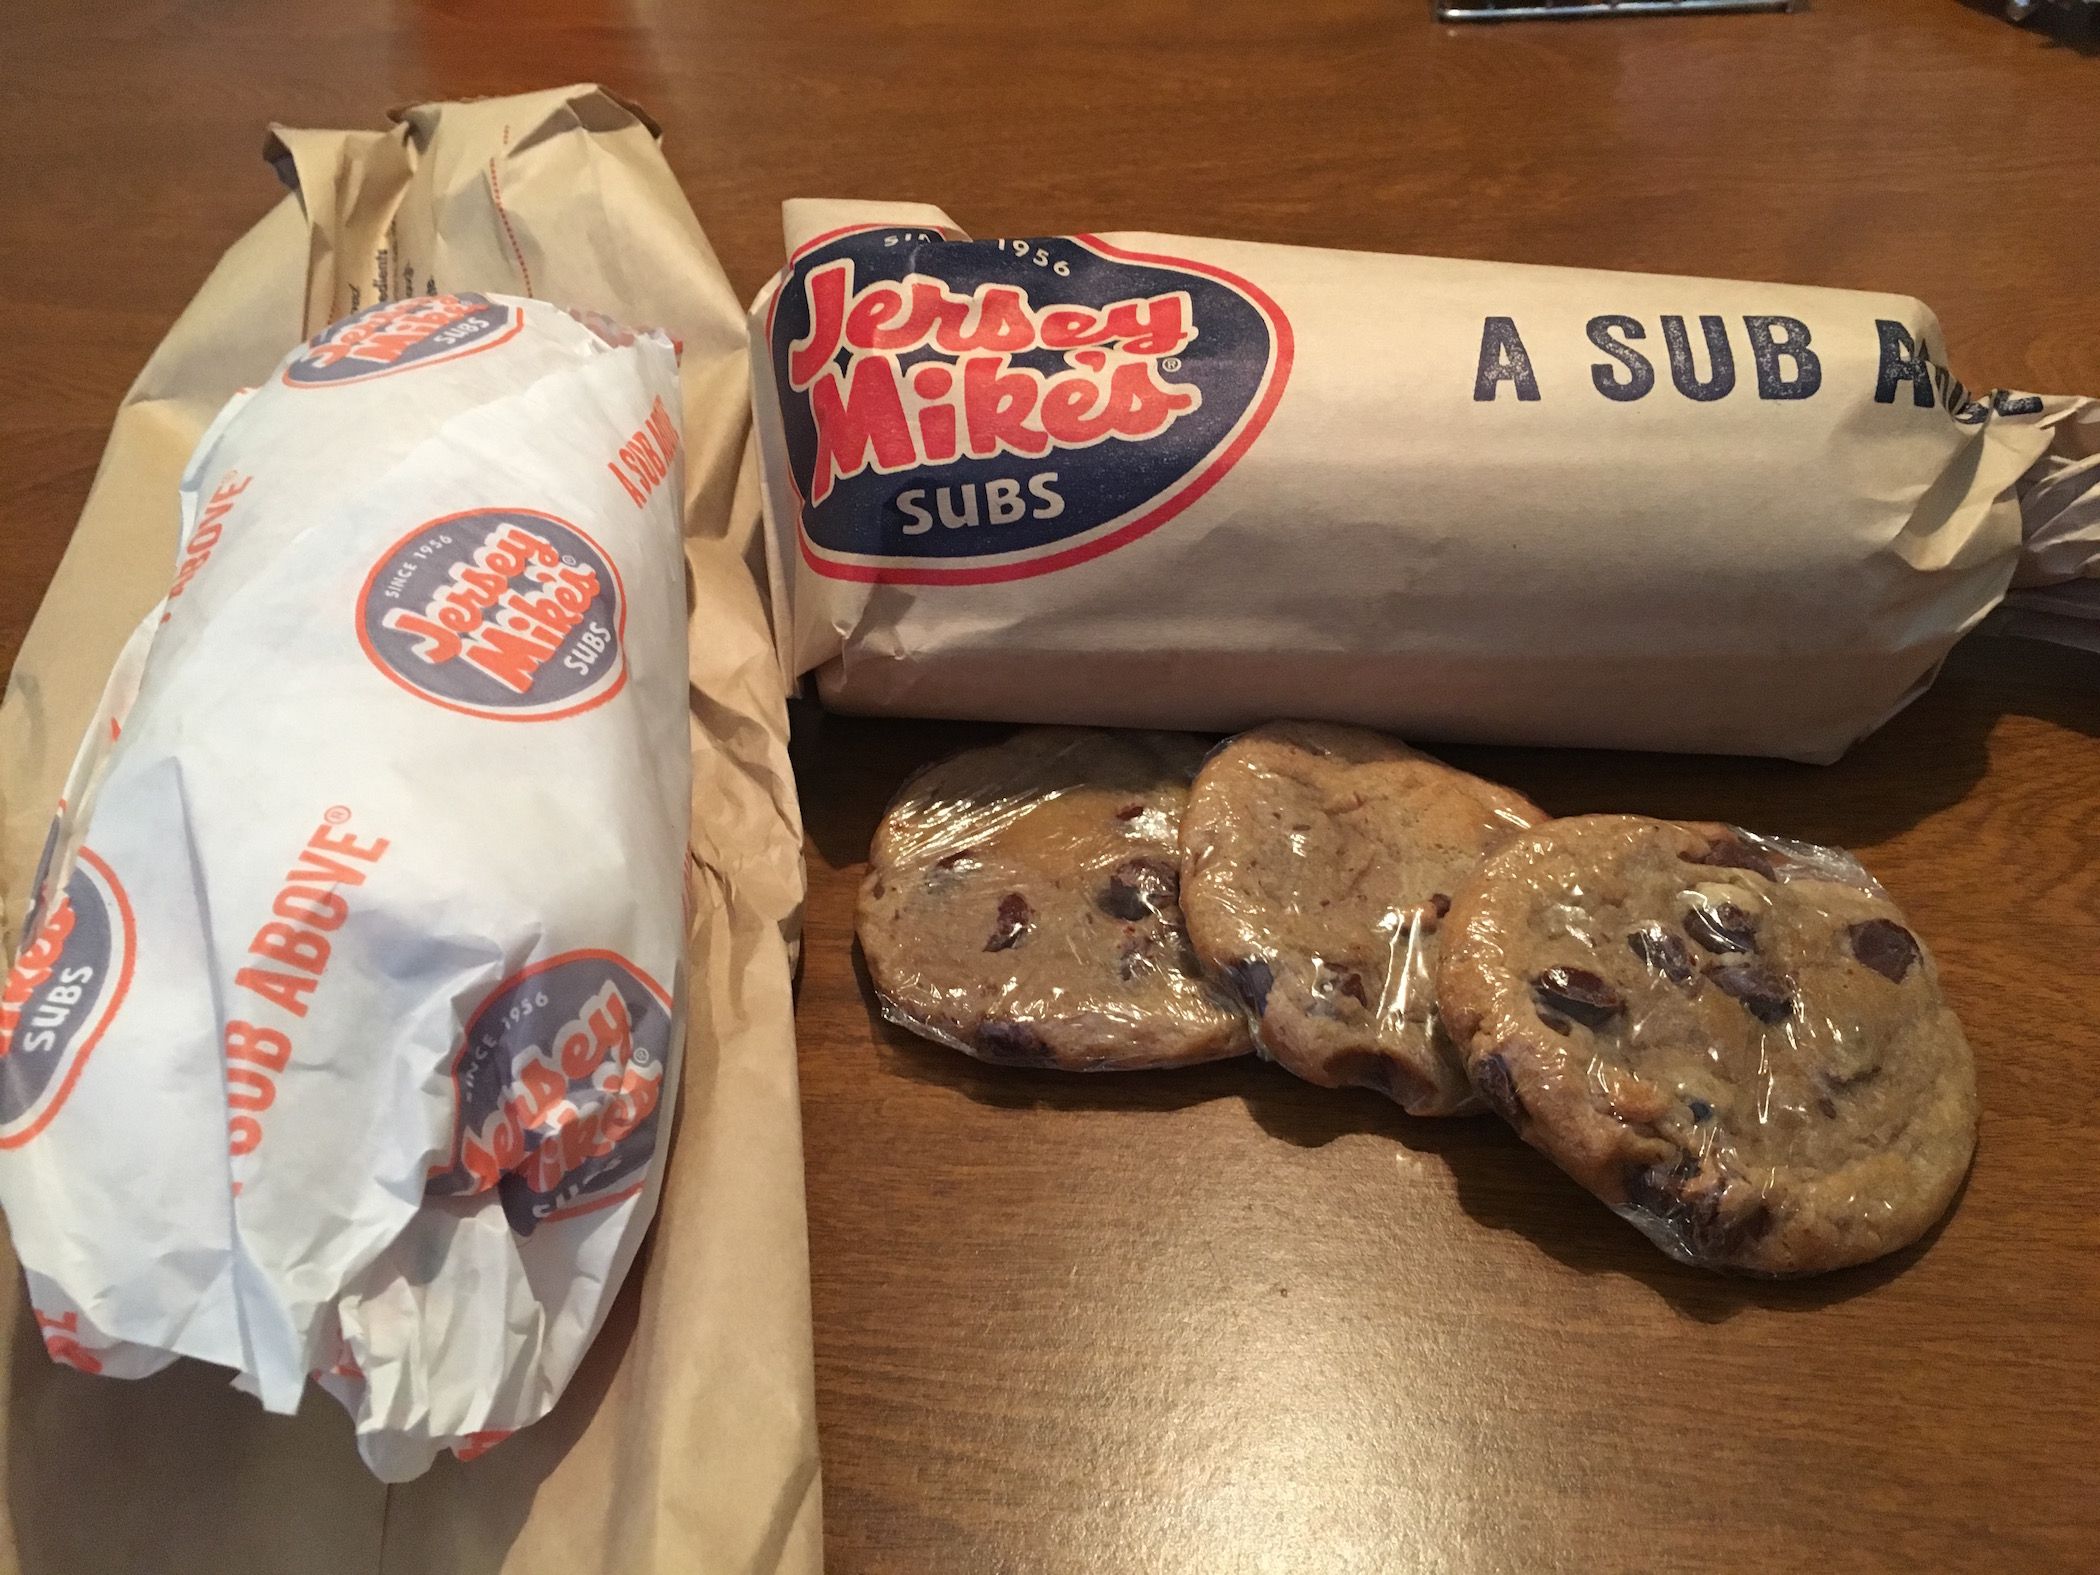 Tasty Tuesday - Jersey Mike's Subs